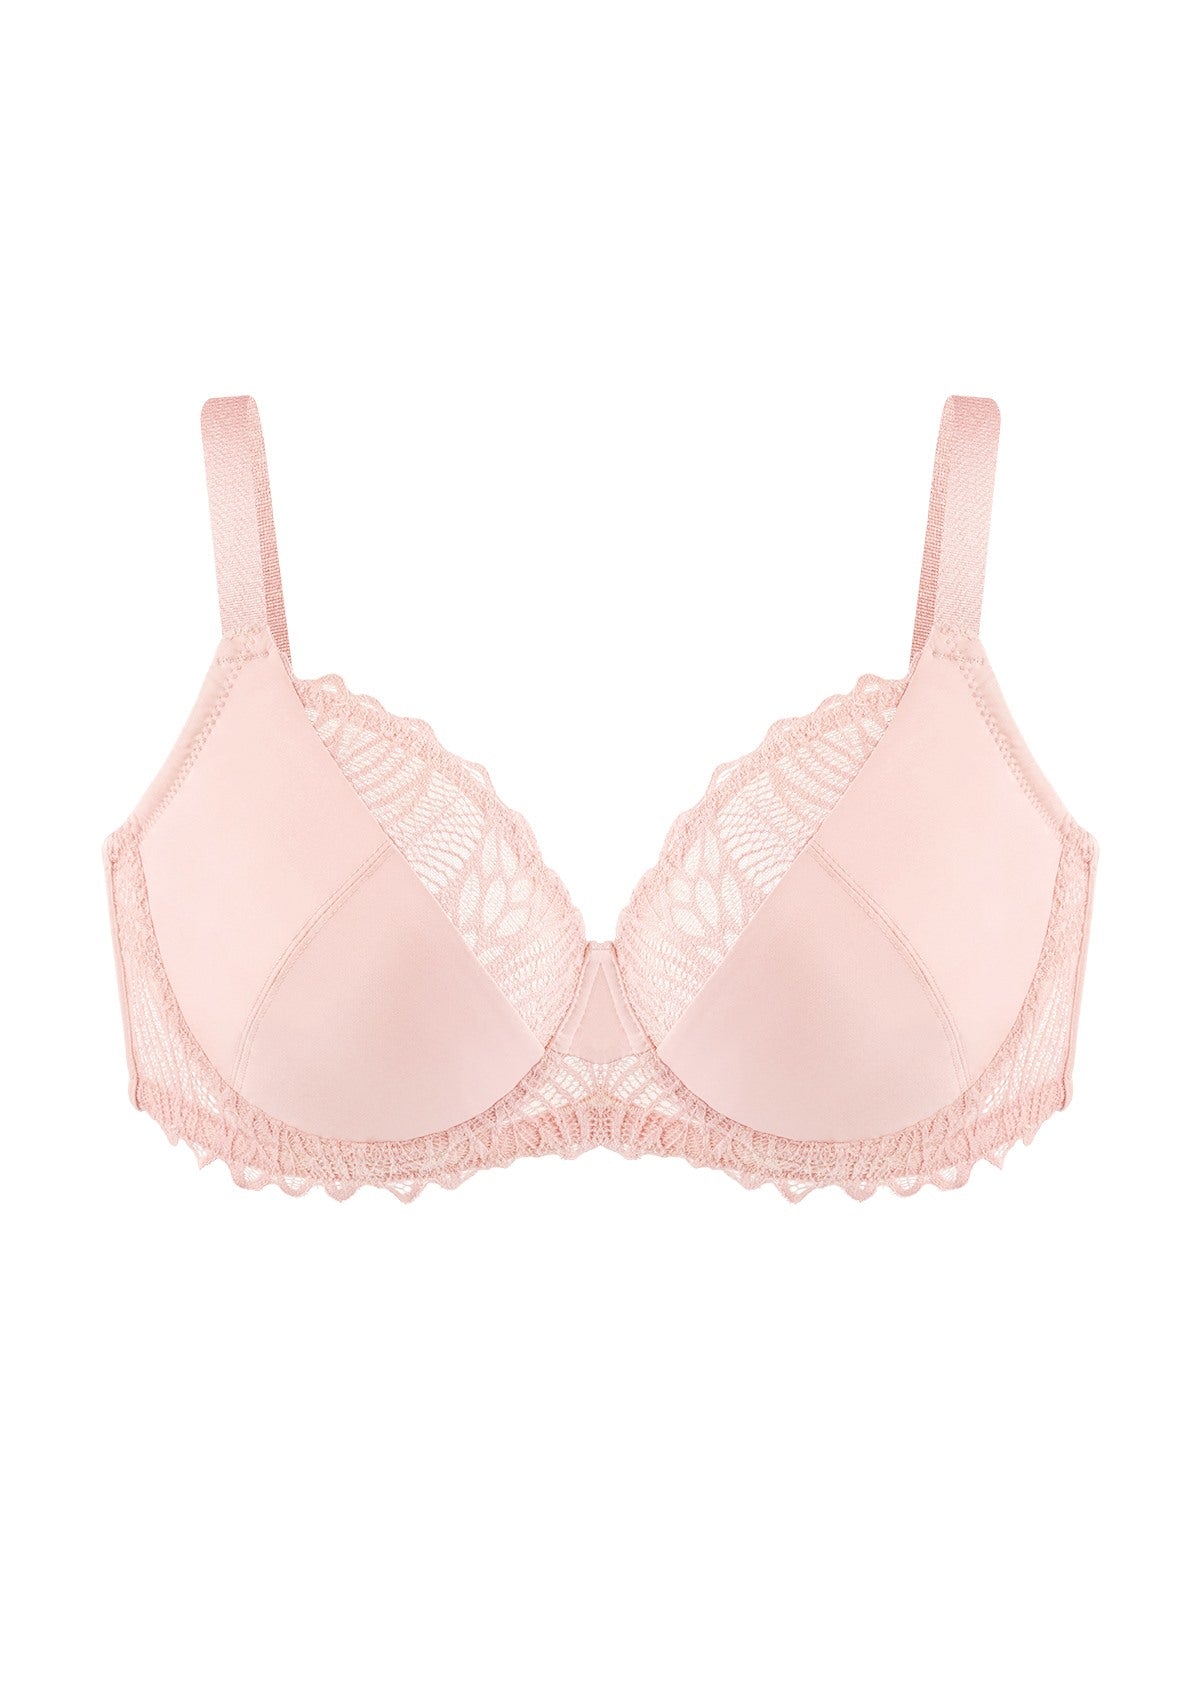 HSIA Pretty Secrets Lace-Trimmed Full Coverage Underwire Bra For Support - Light Pink / 40 / I